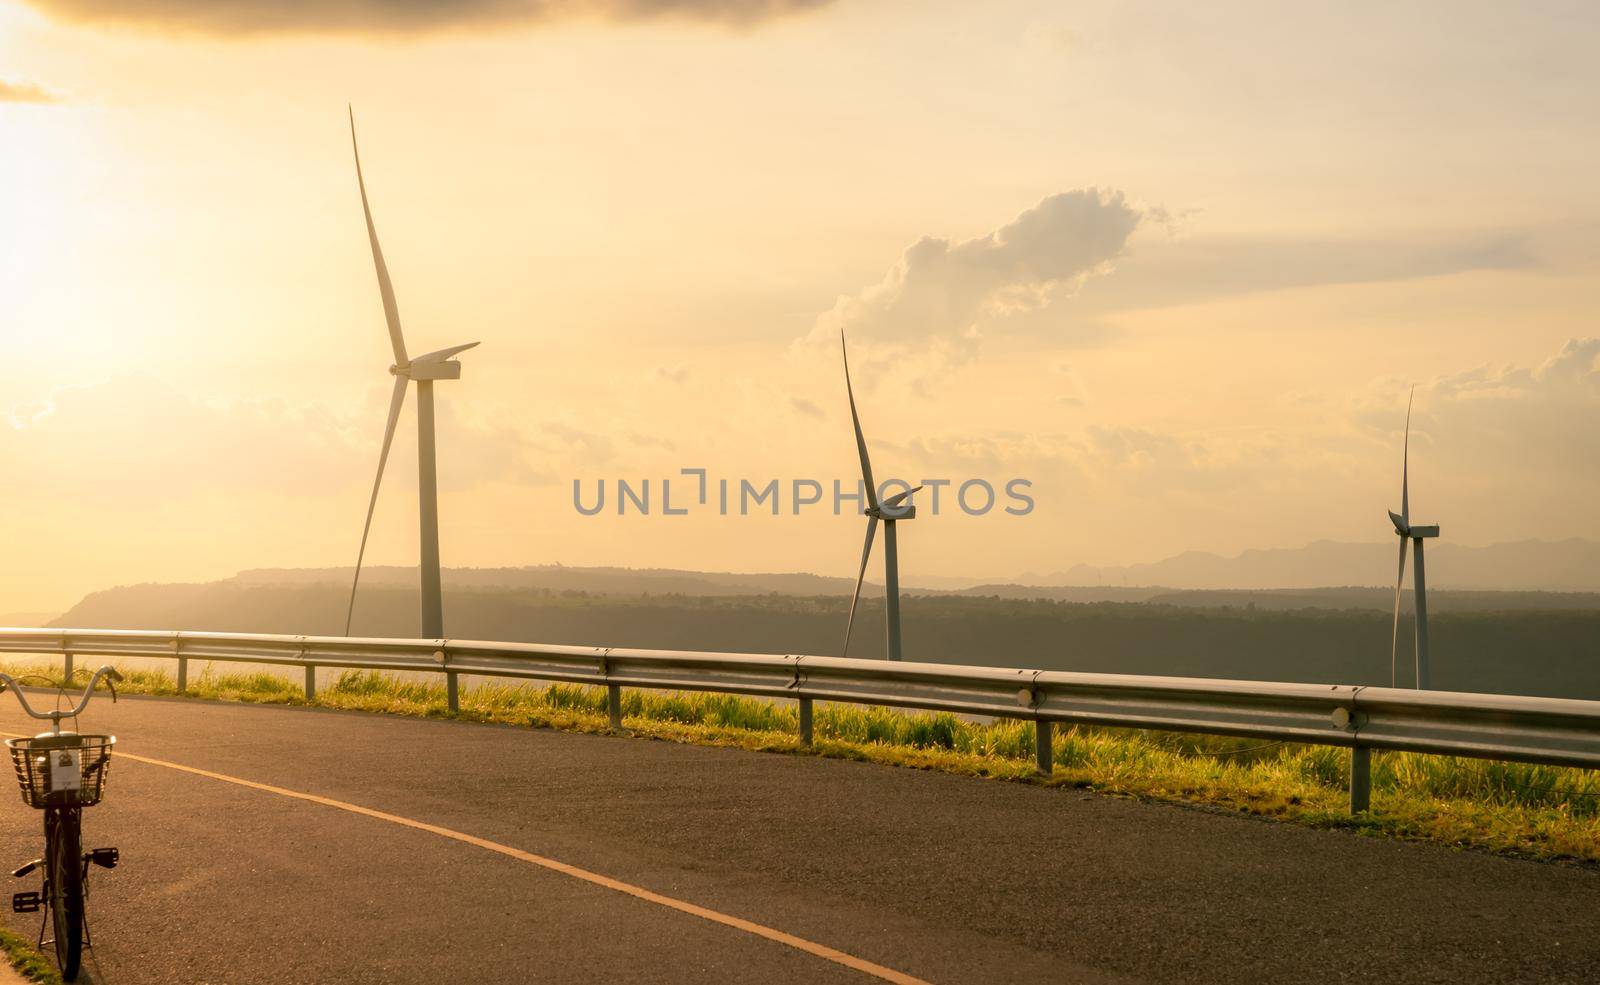 Wind energy. Wind power. Sustainable, renewable energy. Wind turbines generate electricity. Windmill farm on a mountain with blue sky. Green technology. Renewable resource. Sustainable development. by Fahroni